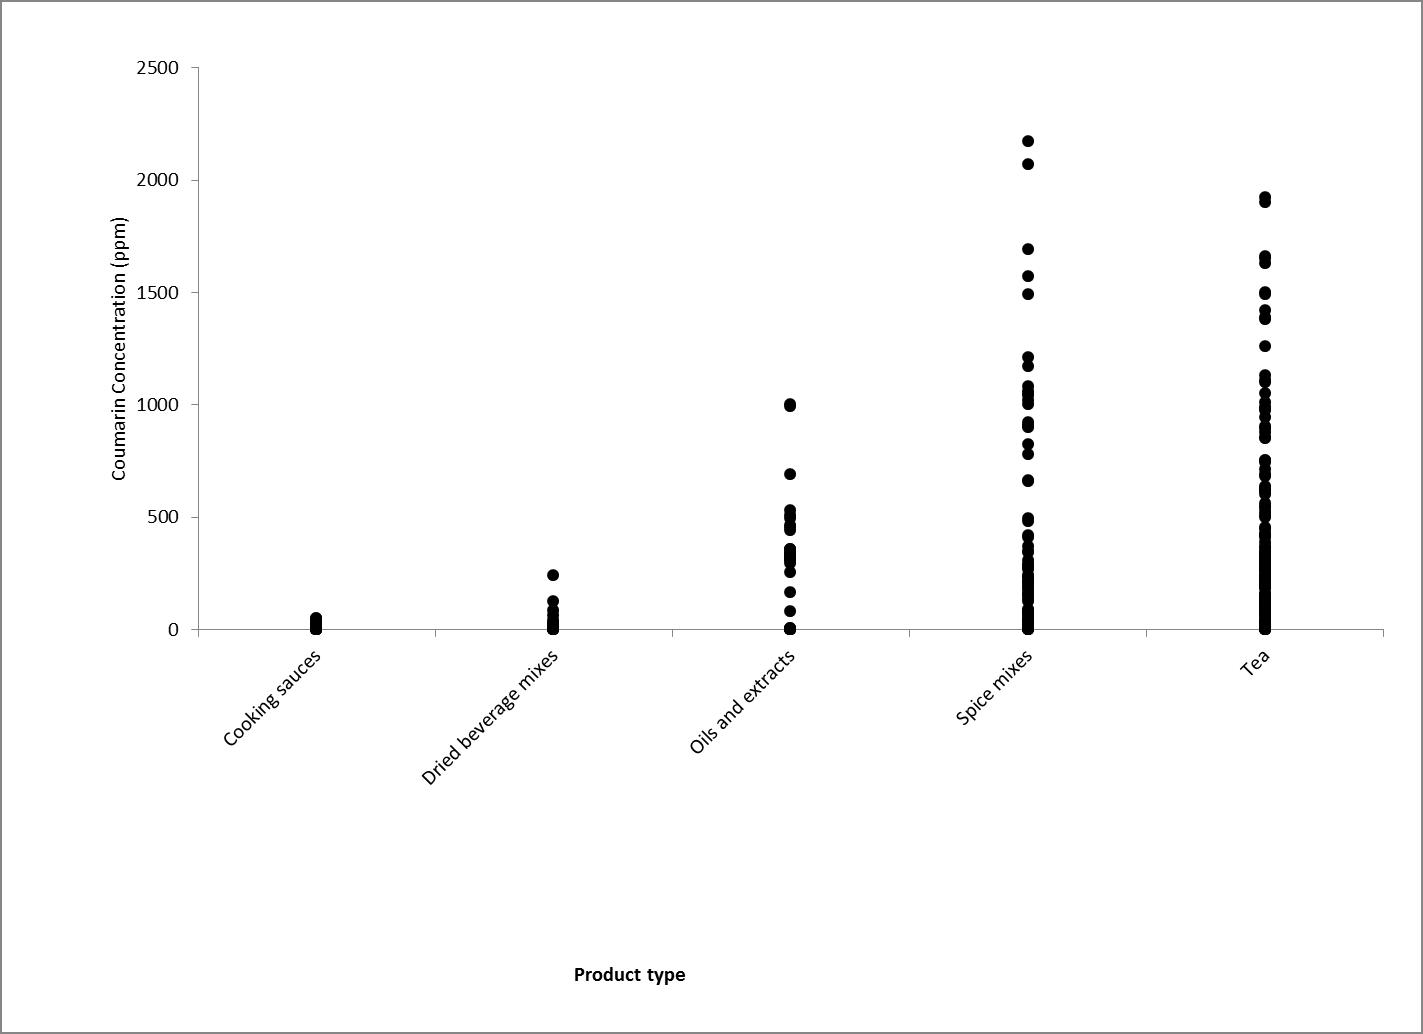 Figure 1 illustrates the range of coumarin concentration detected in the survey samples by product type.